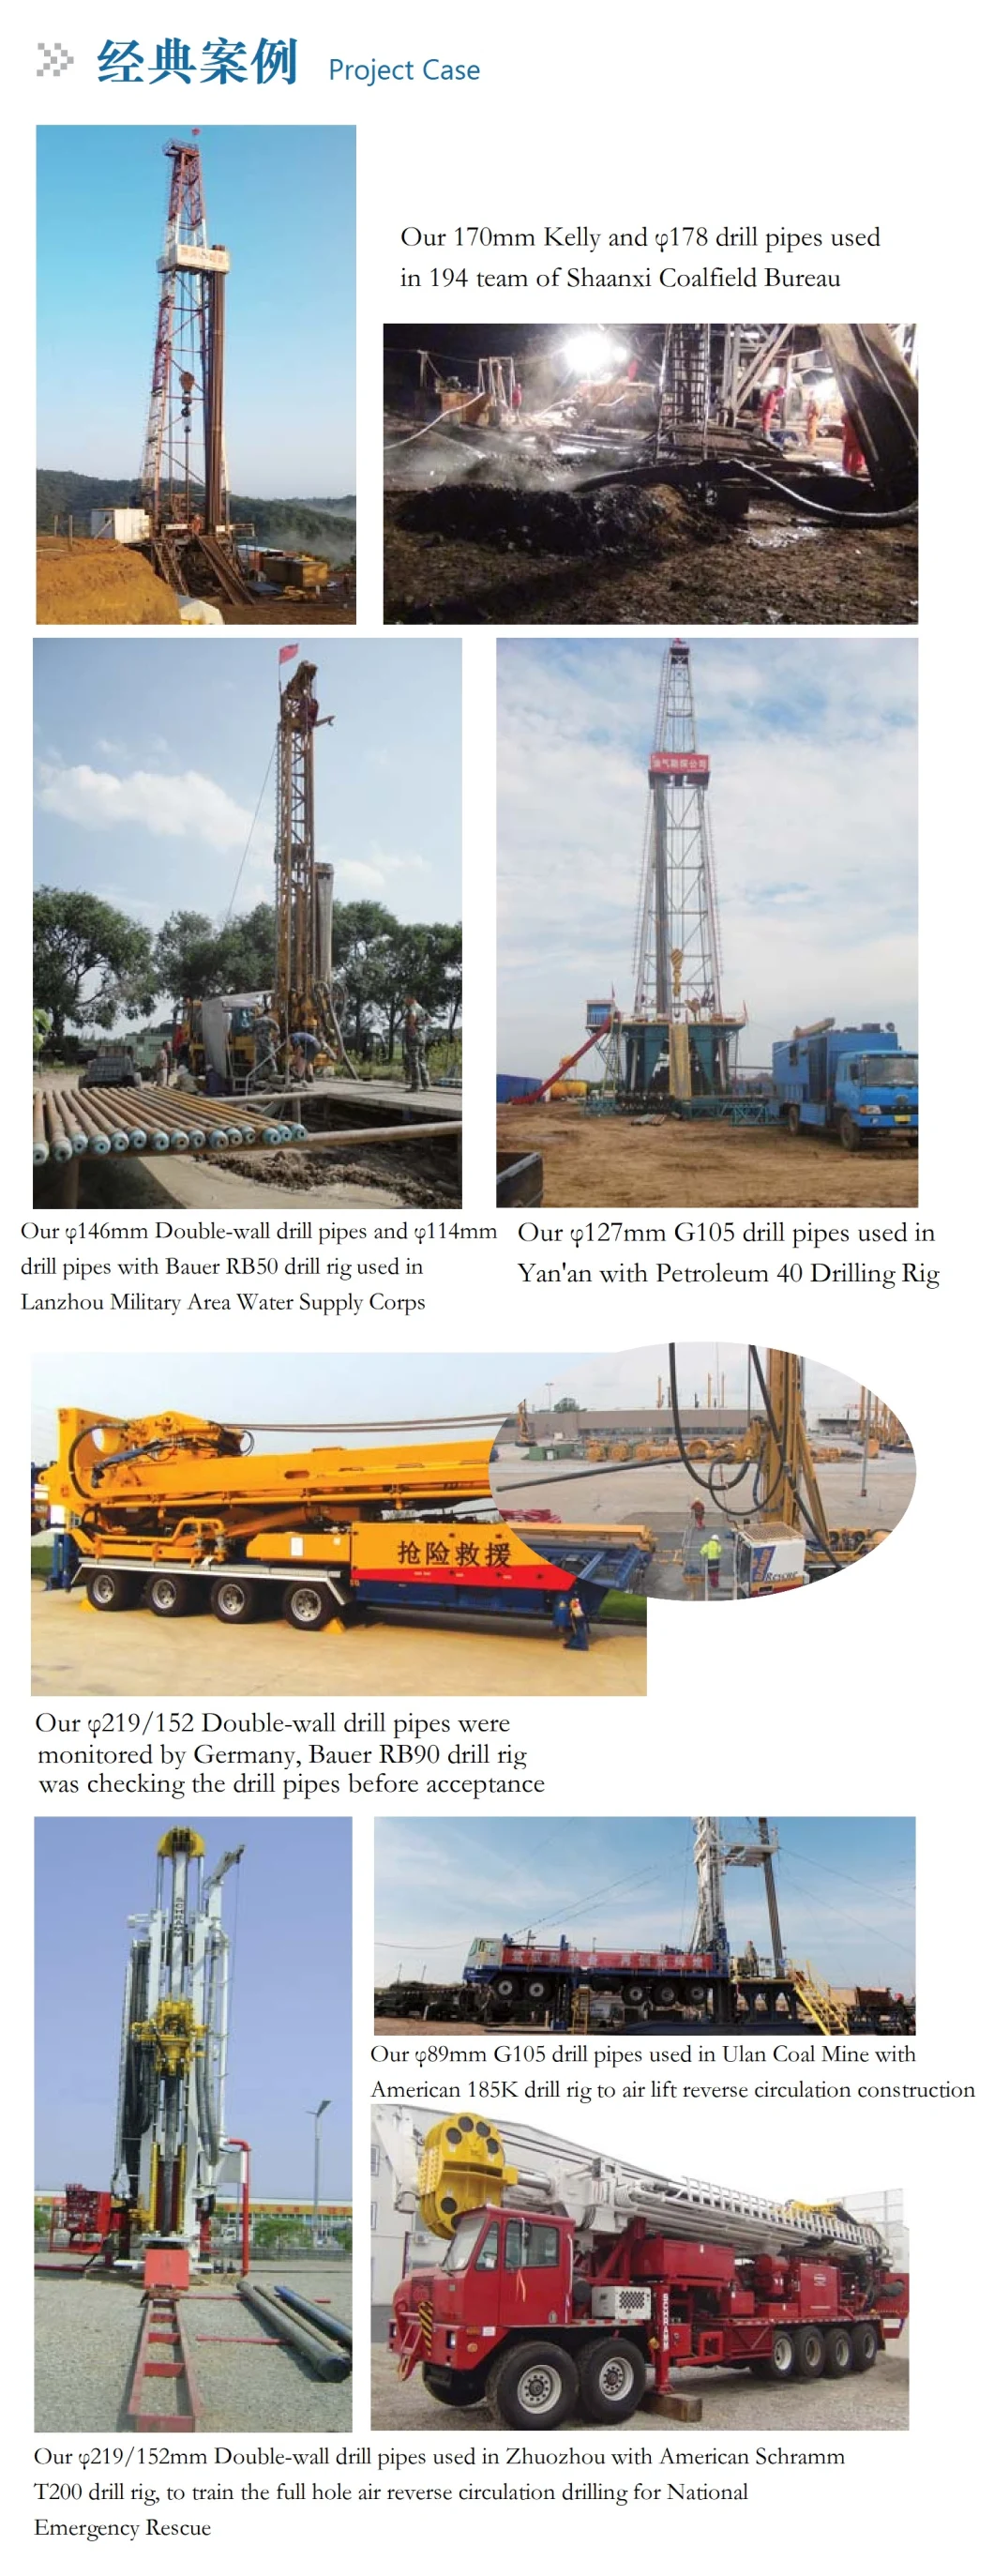 Spt-1500 Drilling Rig for Geological and Geothermal Development